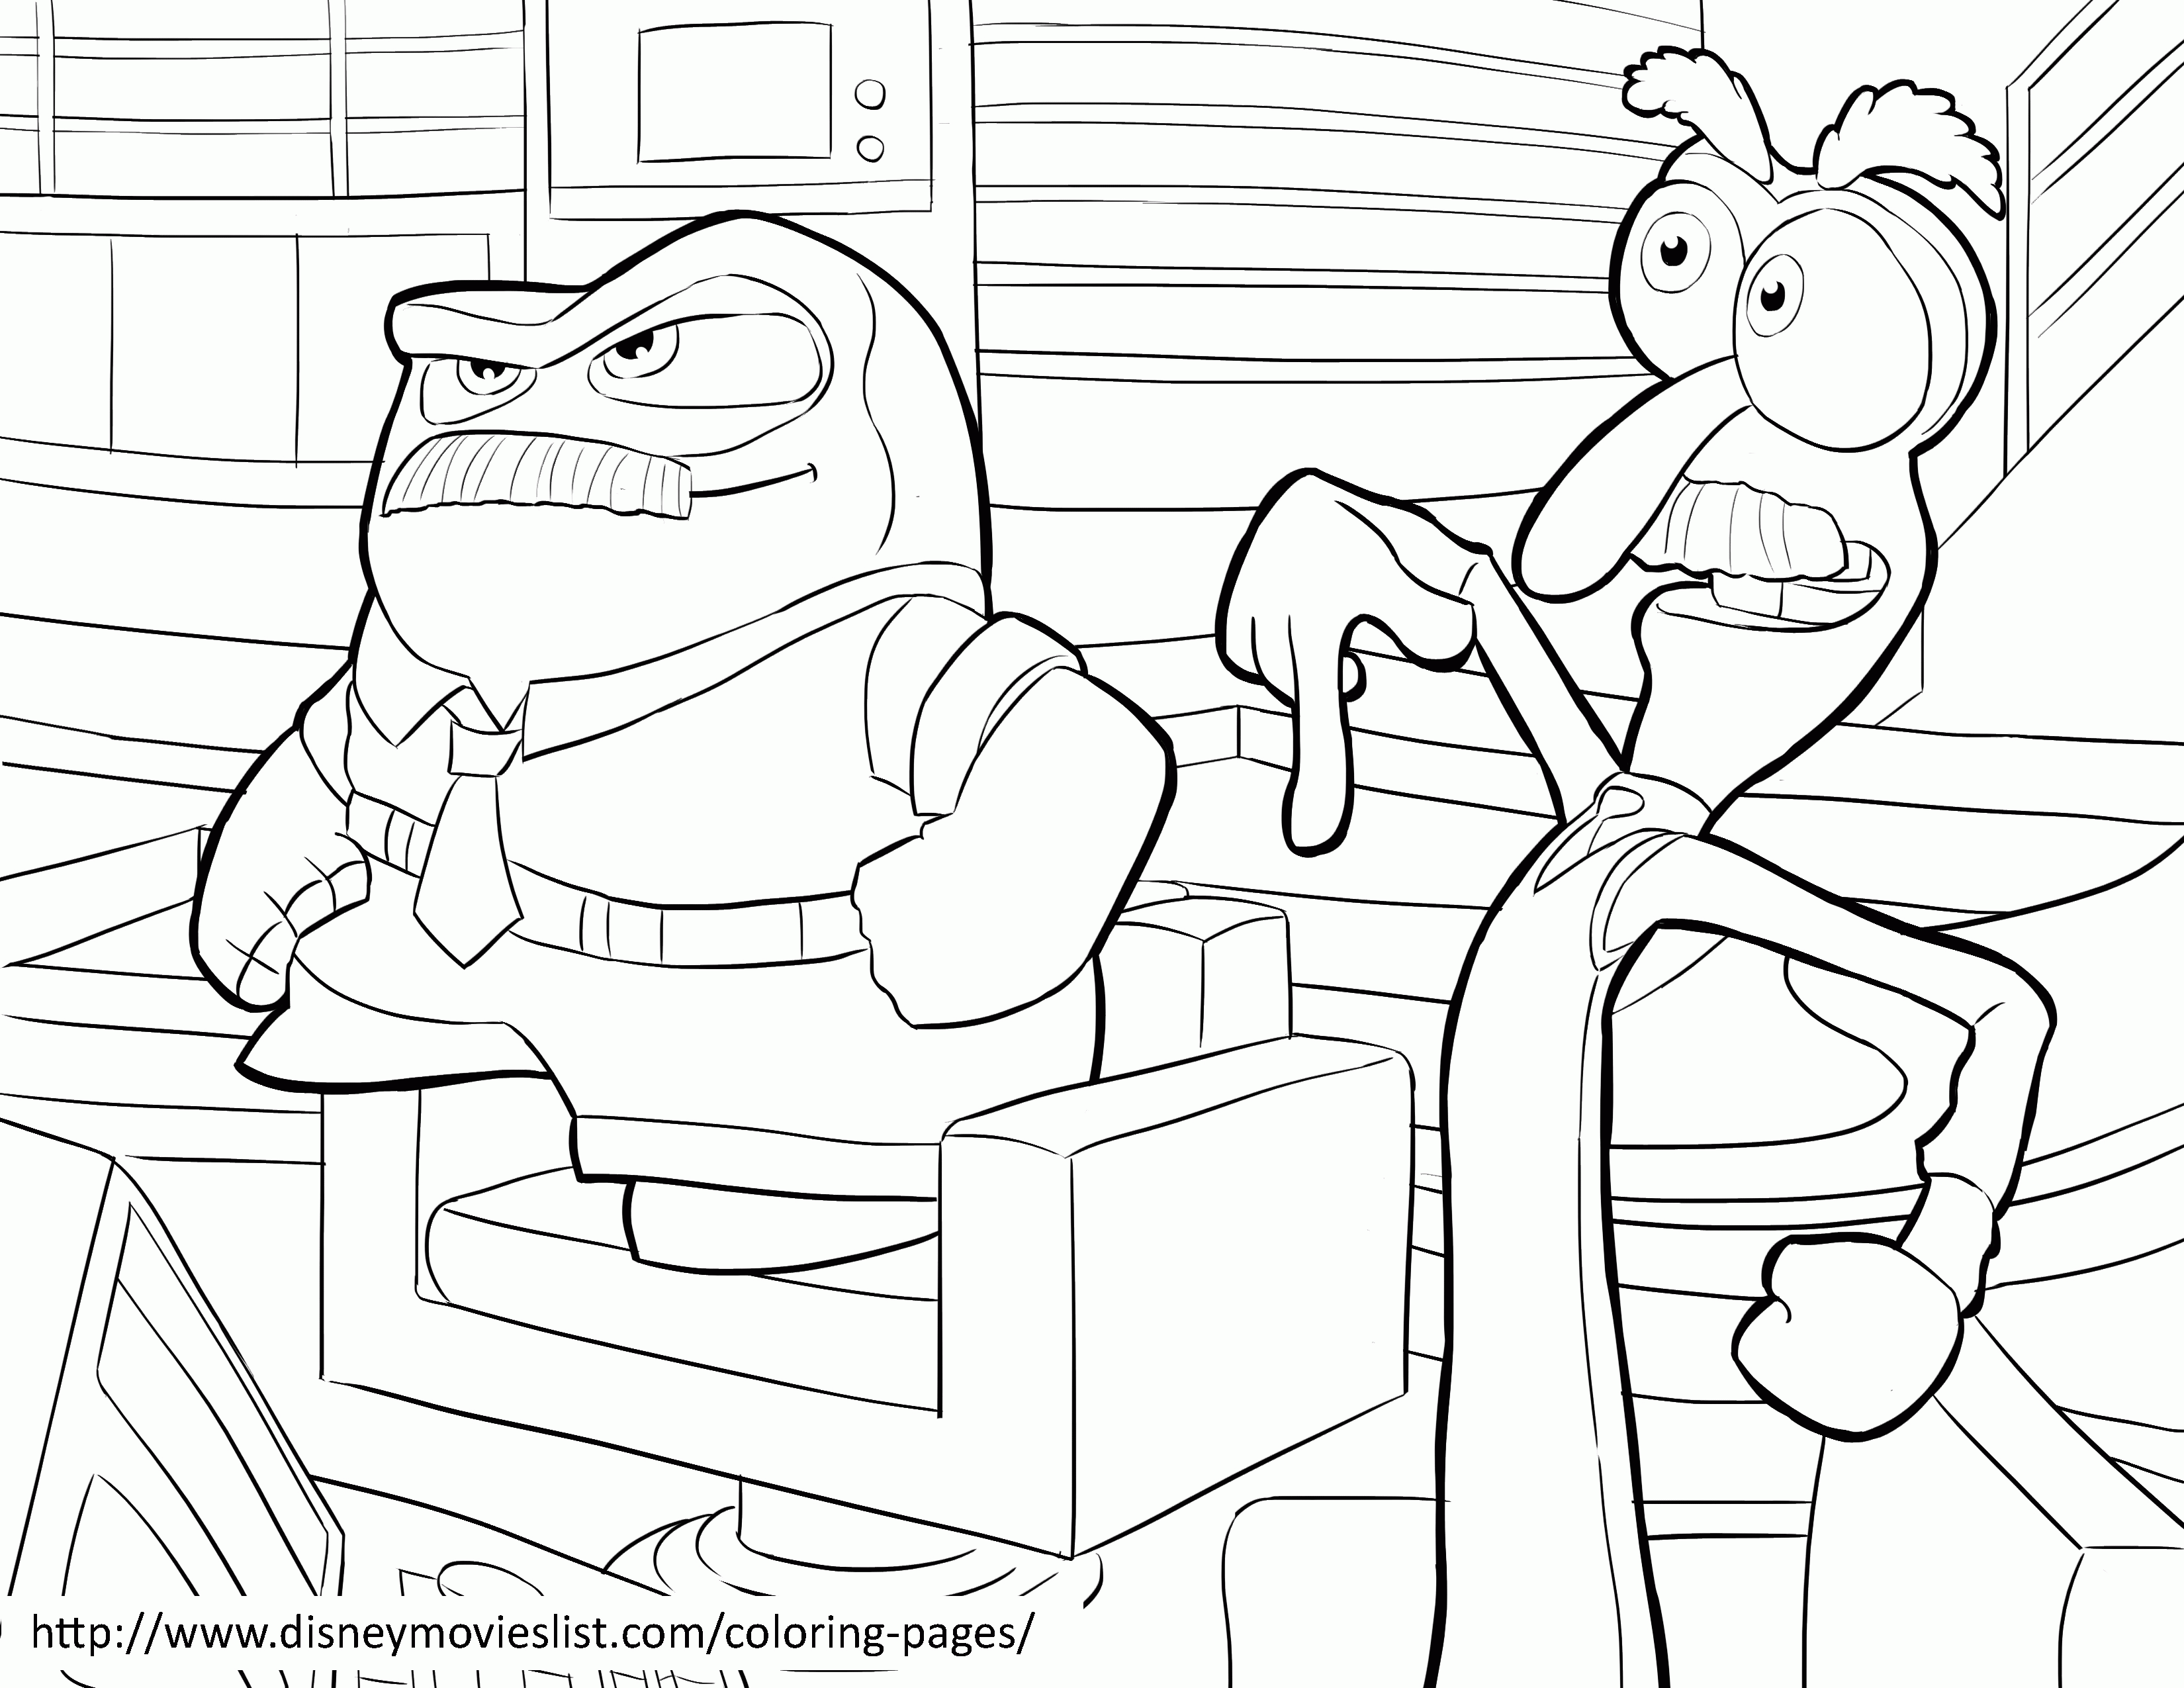 inside-out-coloring-page-0047-q1